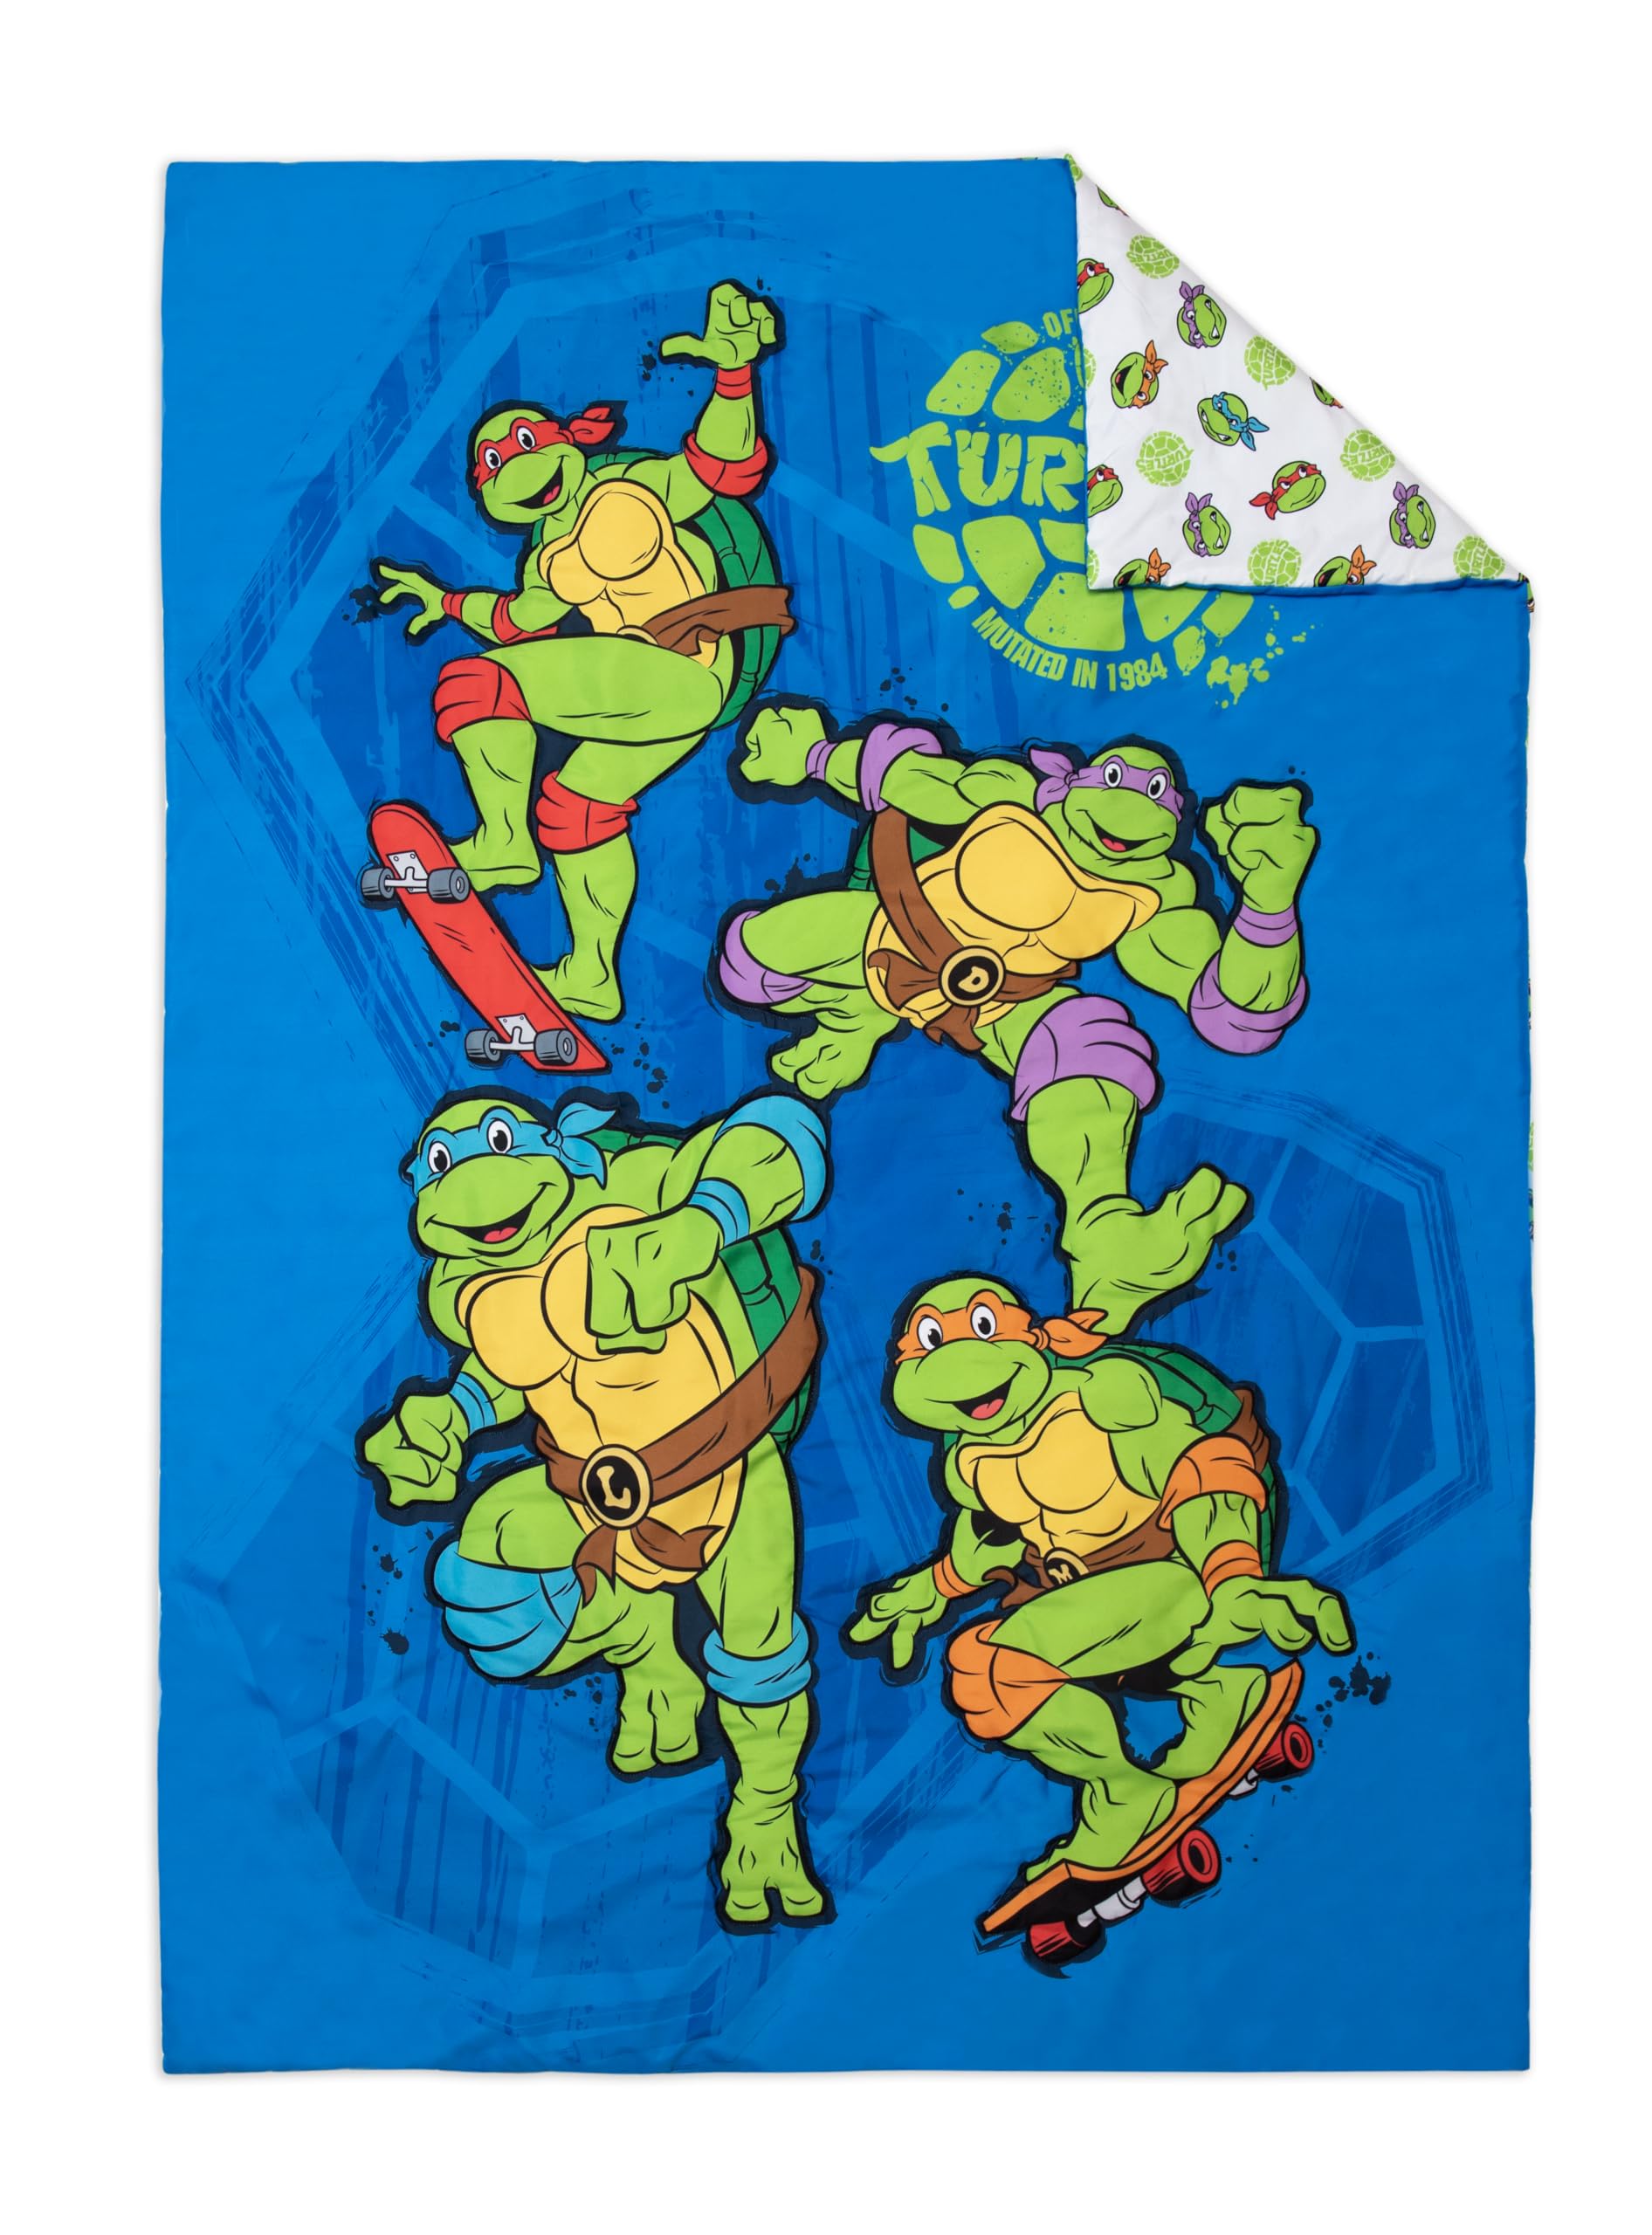 Teenage Mutant Ninja Turtles 4 Piece Toddler Bedding Set – Includes Comforter, Sheet Set – Fitted + Top Sheet + Reversible Pillowcase for Boys Bed, Blue